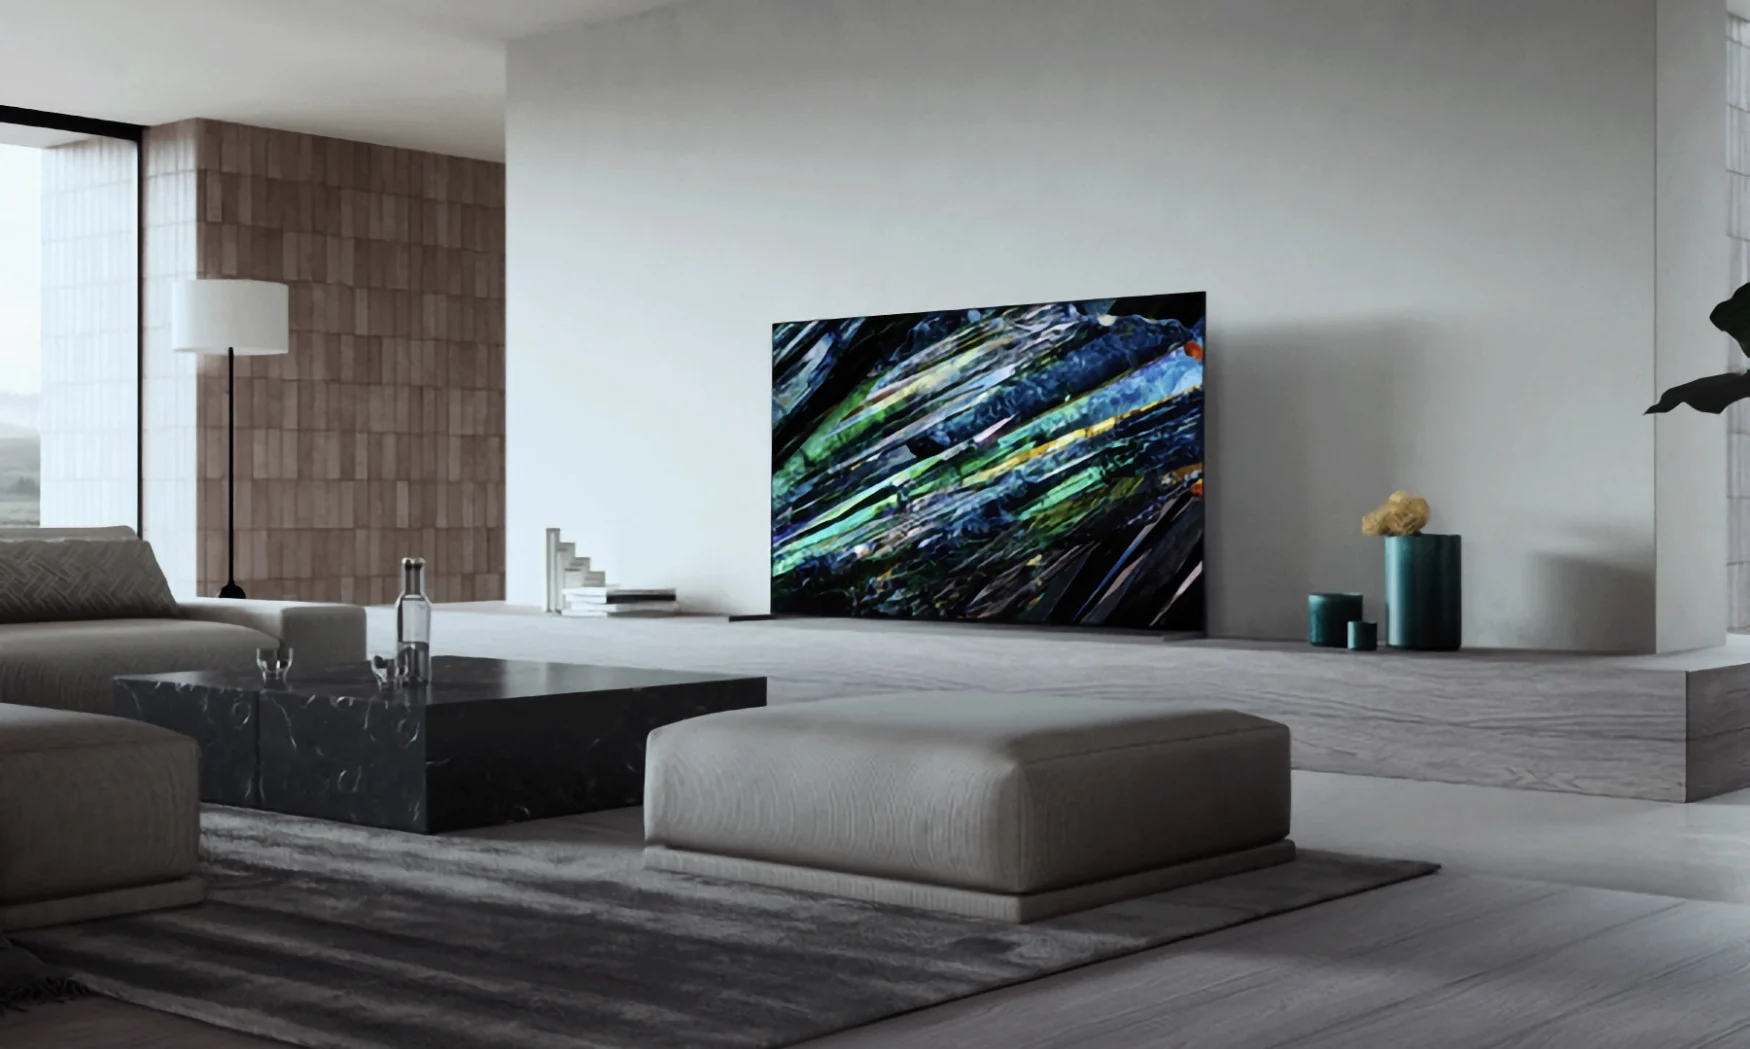 Sony's latest QD-OLED TV is significantly brighter than last year’s models - Engadget